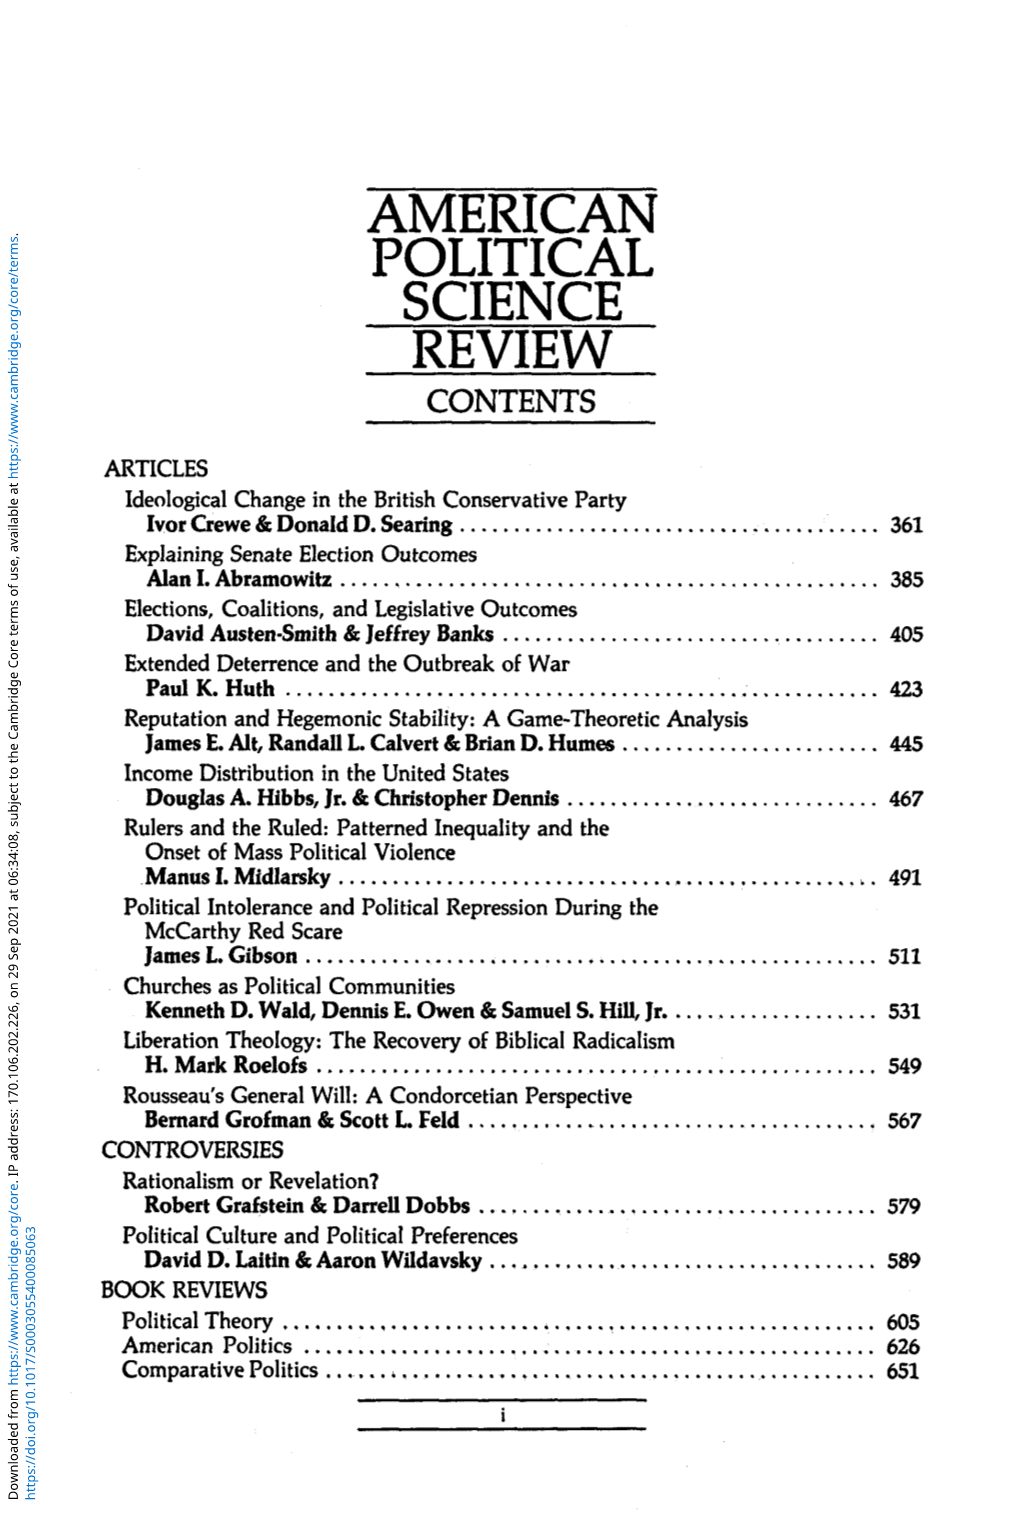 American Political Science Review Contents